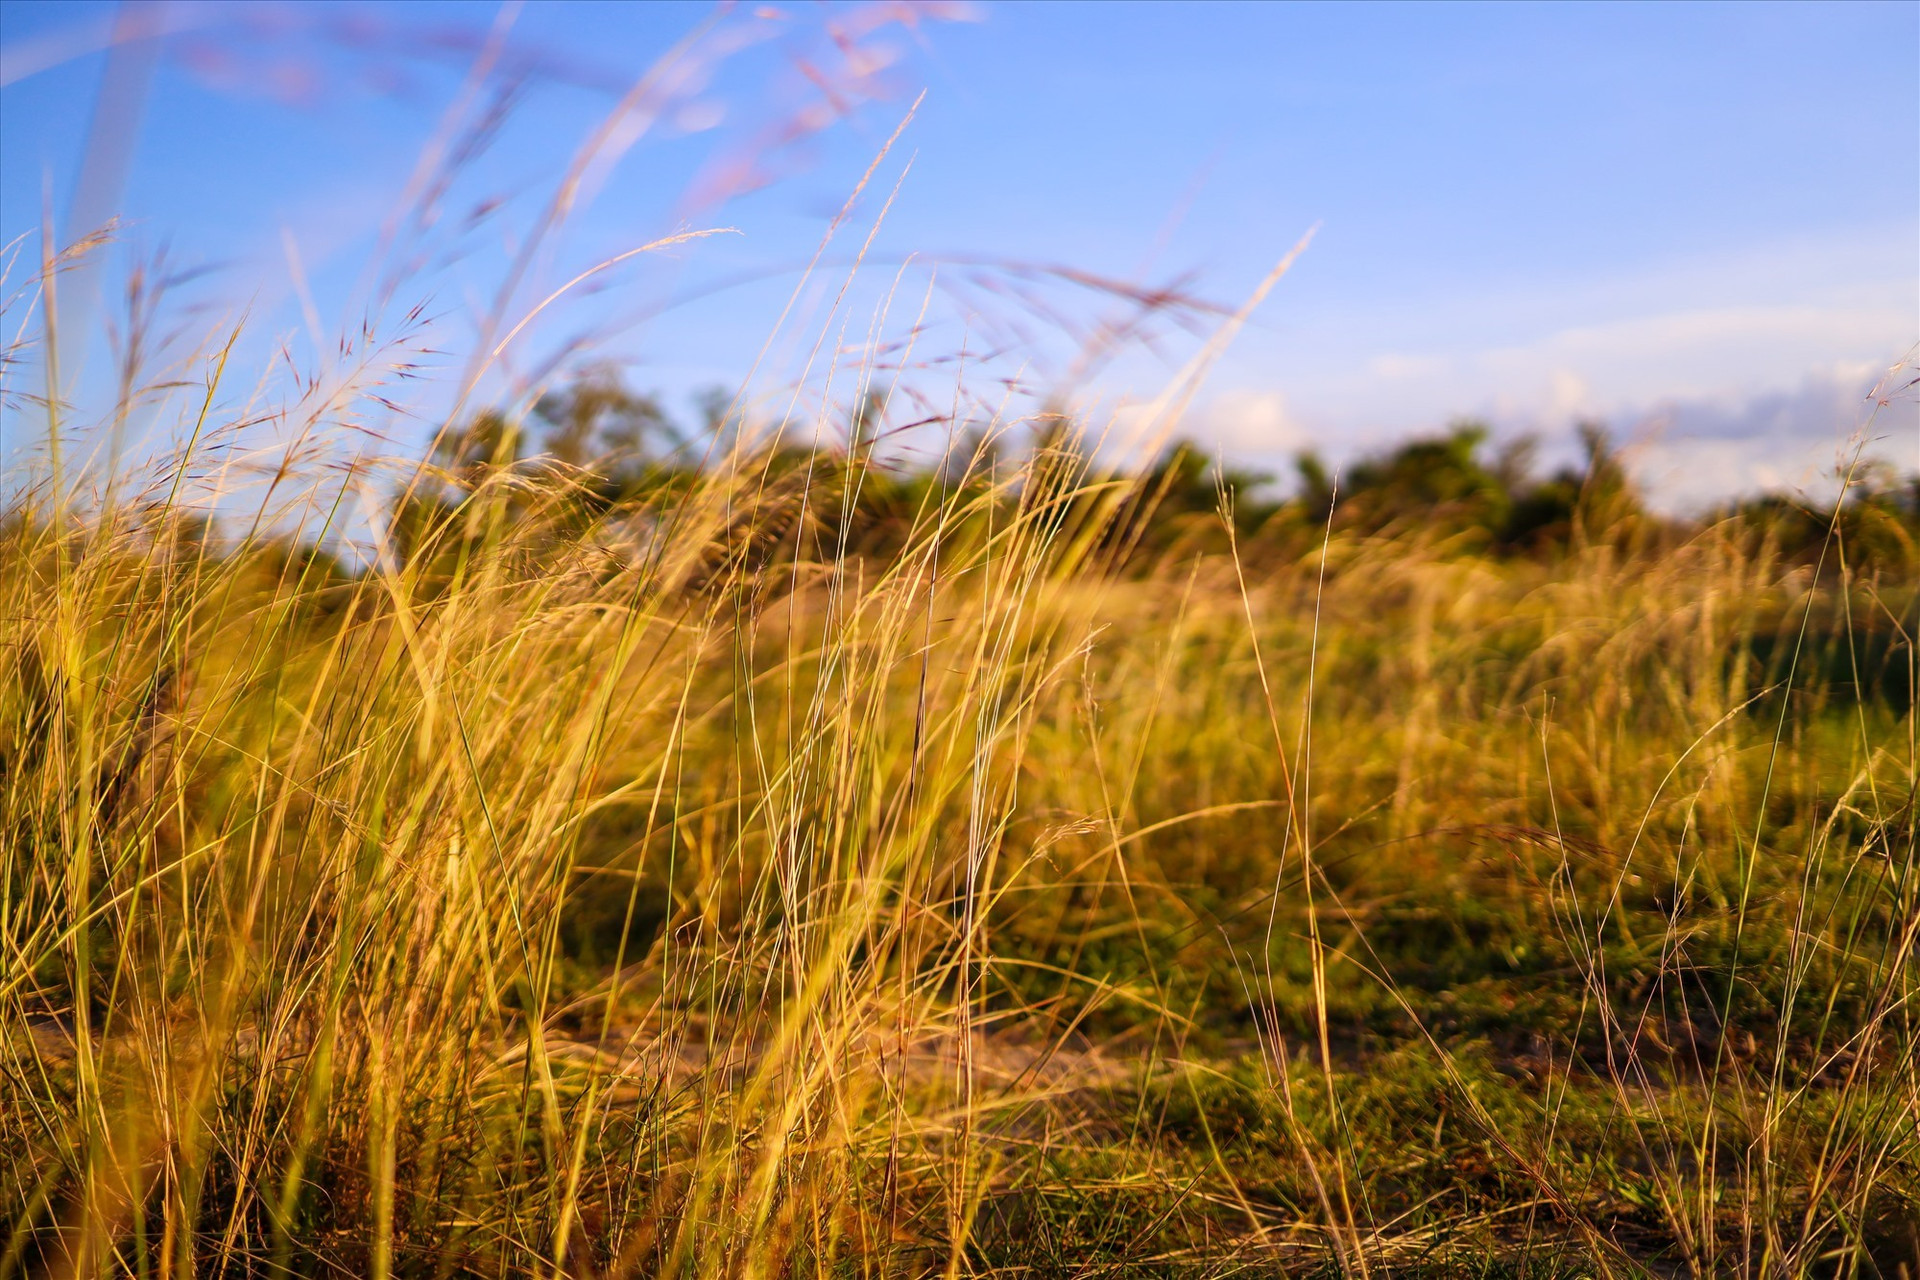 The grass gradually shifting from yellow to an orange hue reminiscent of burnt grass